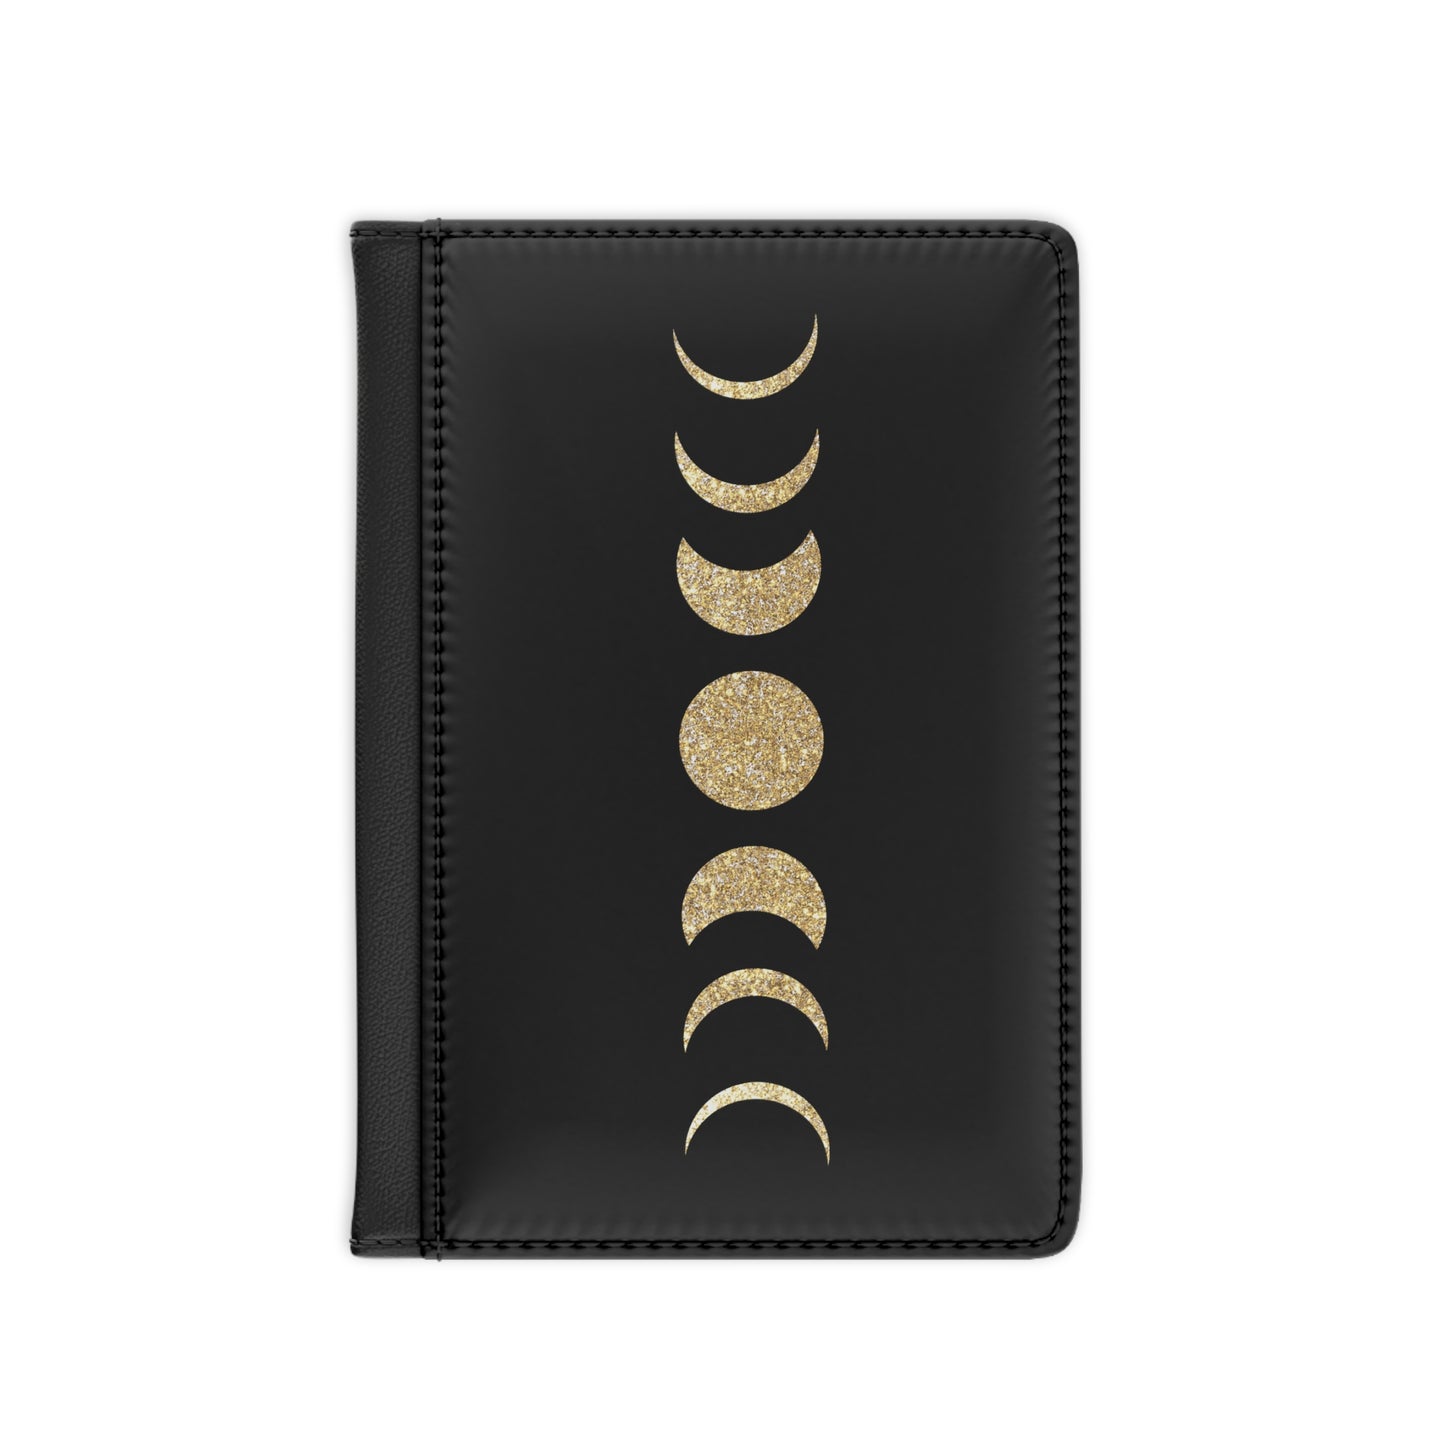 Moon Phases Passport Cover